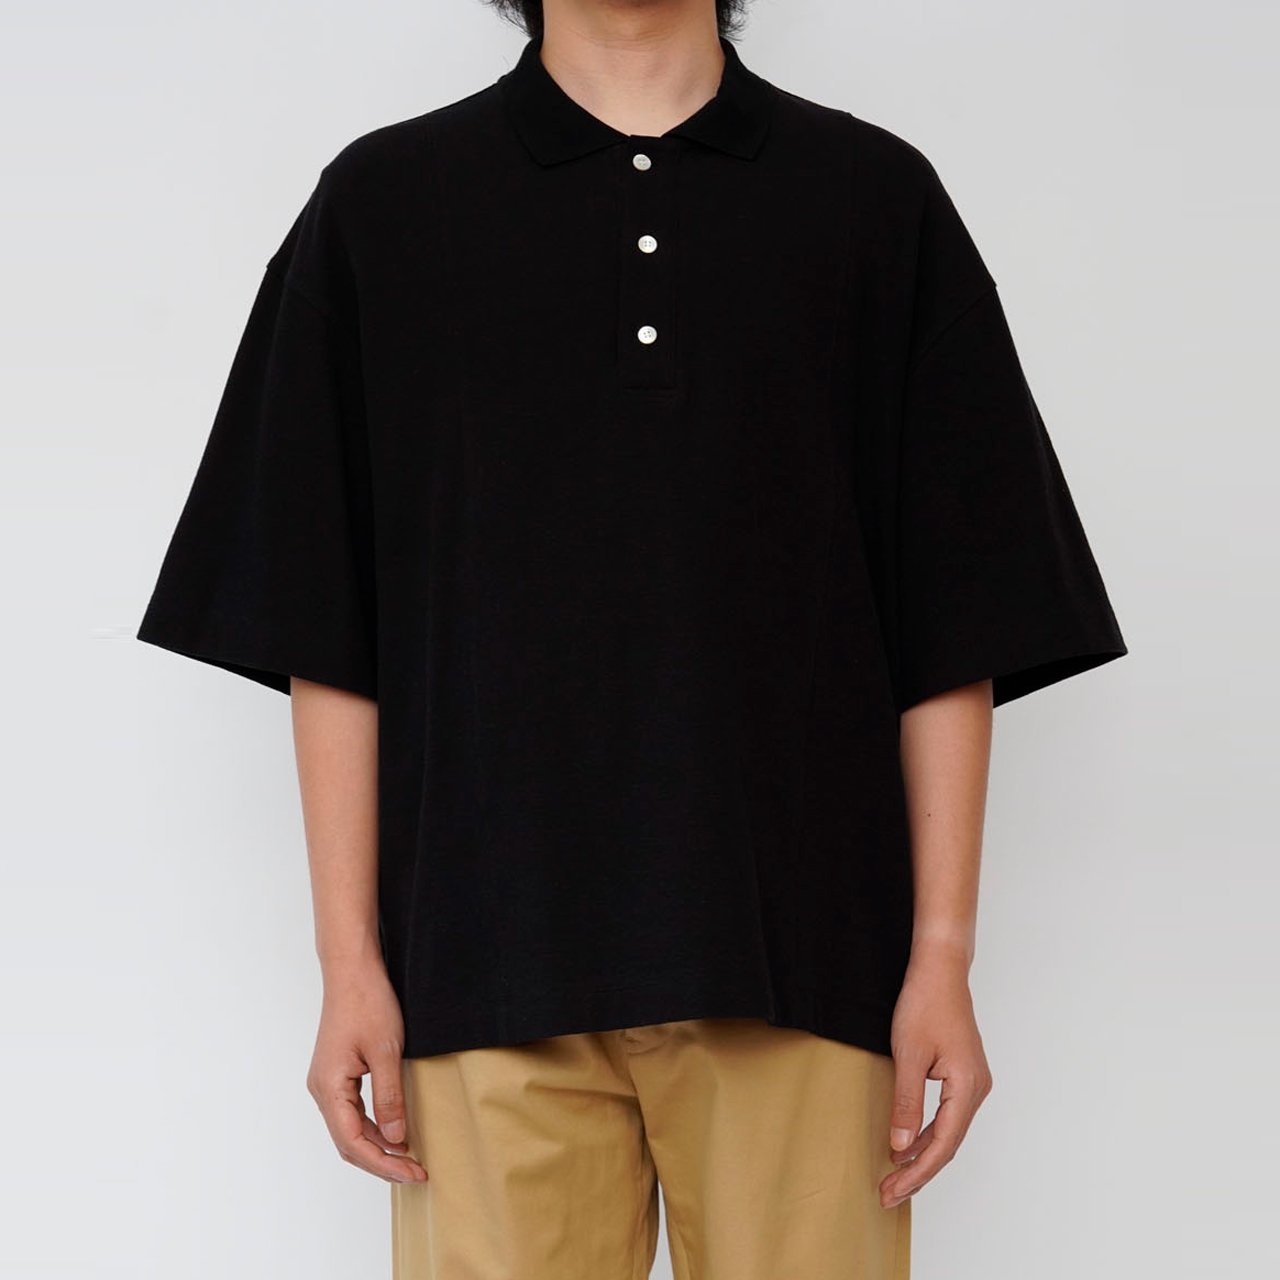 <img class='new_mark_img1' src='https://img.shop-pro.jp/img/new/icons5.gif' style='border:none;display:inline;margin:0px;padding:0px;width:auto;' />EVCON (ӥ)COTTON KNIT SHORT SLEEVE POLO SHIRTS BLACK